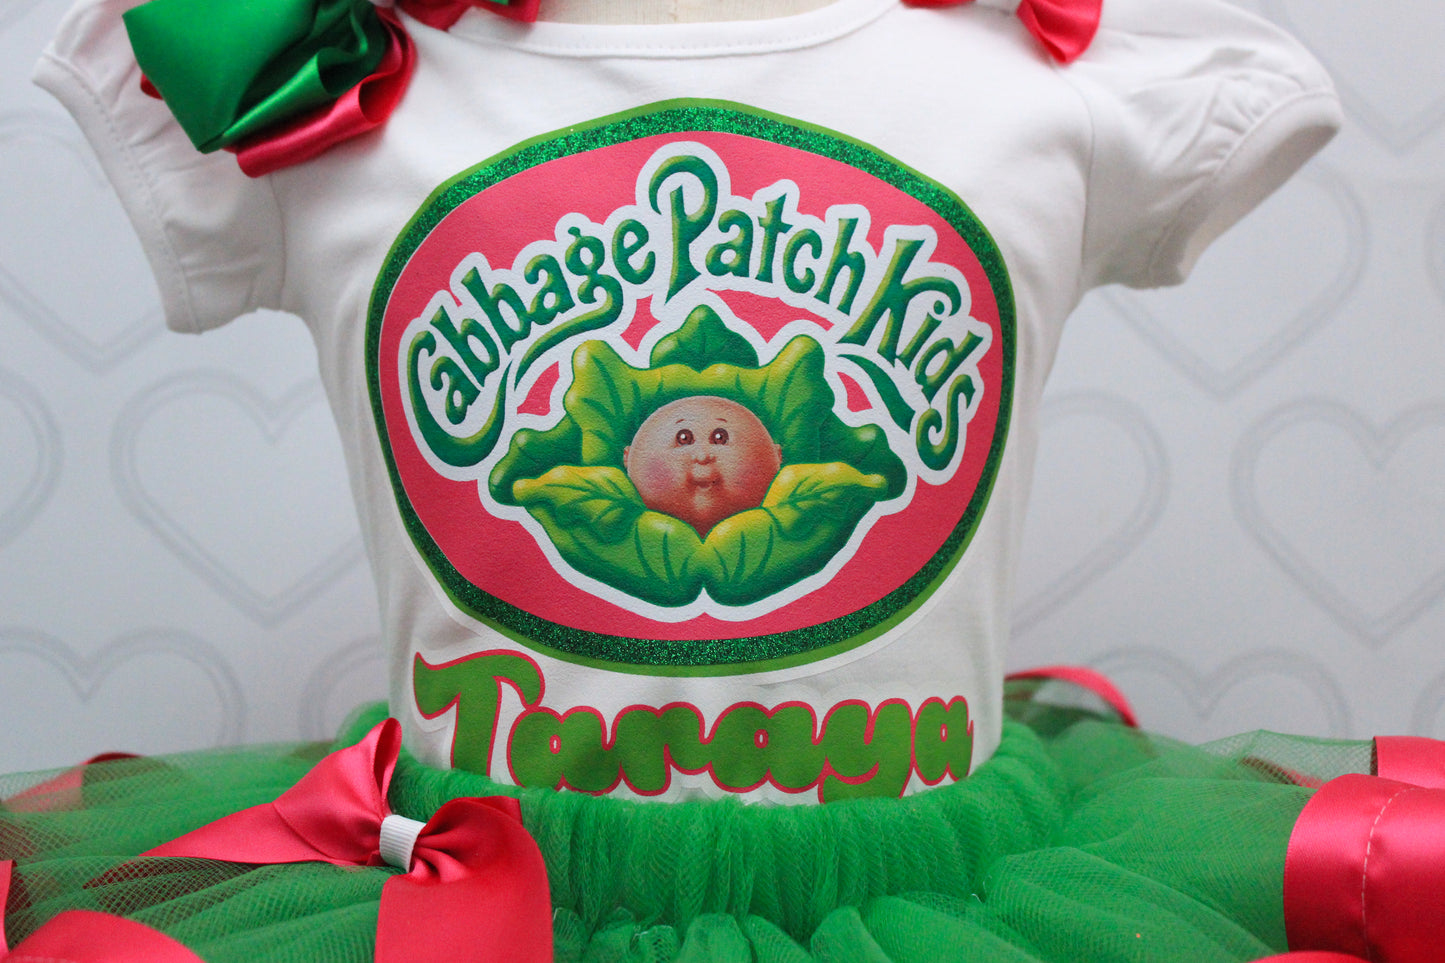 Cabbage Patch tutu set- Cabbage patch outfit-Cabbage patch dress